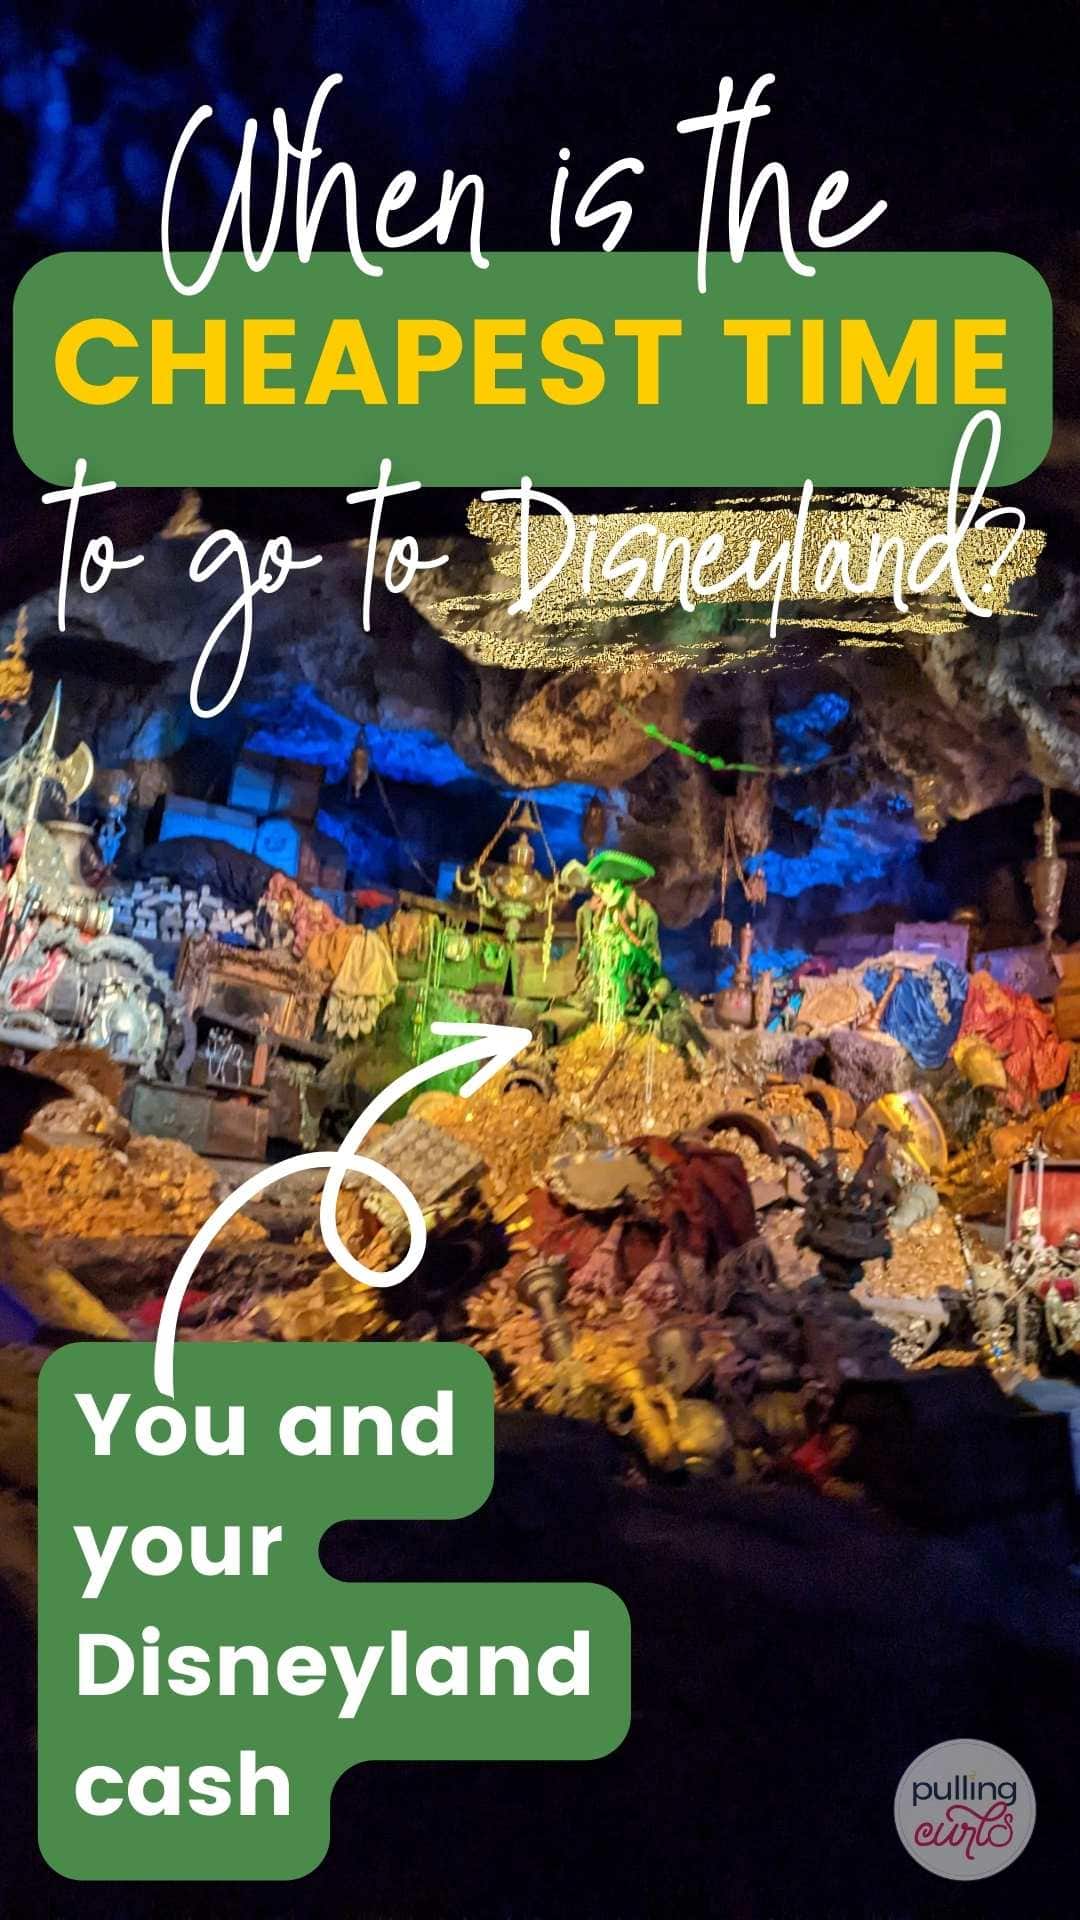 when is the cheapest time to go to disneyland? / Pirates of the Carribean ride via @pullingcurls